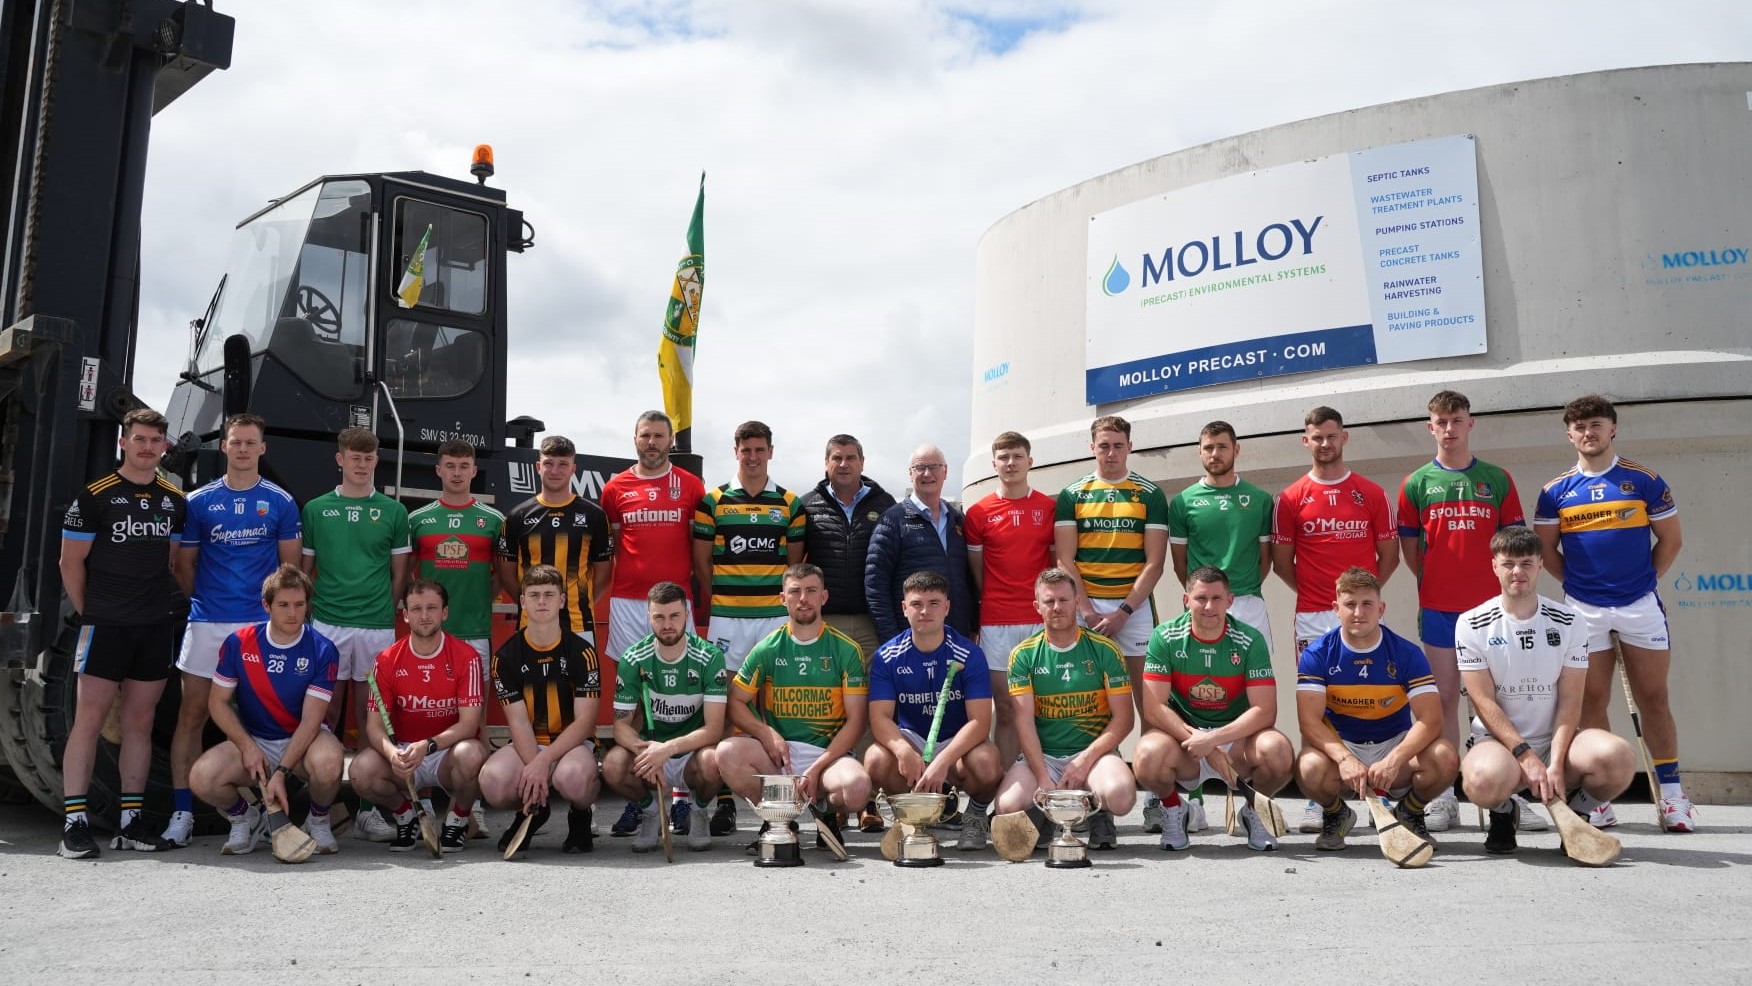 Club Hurling Championships Commence This Week